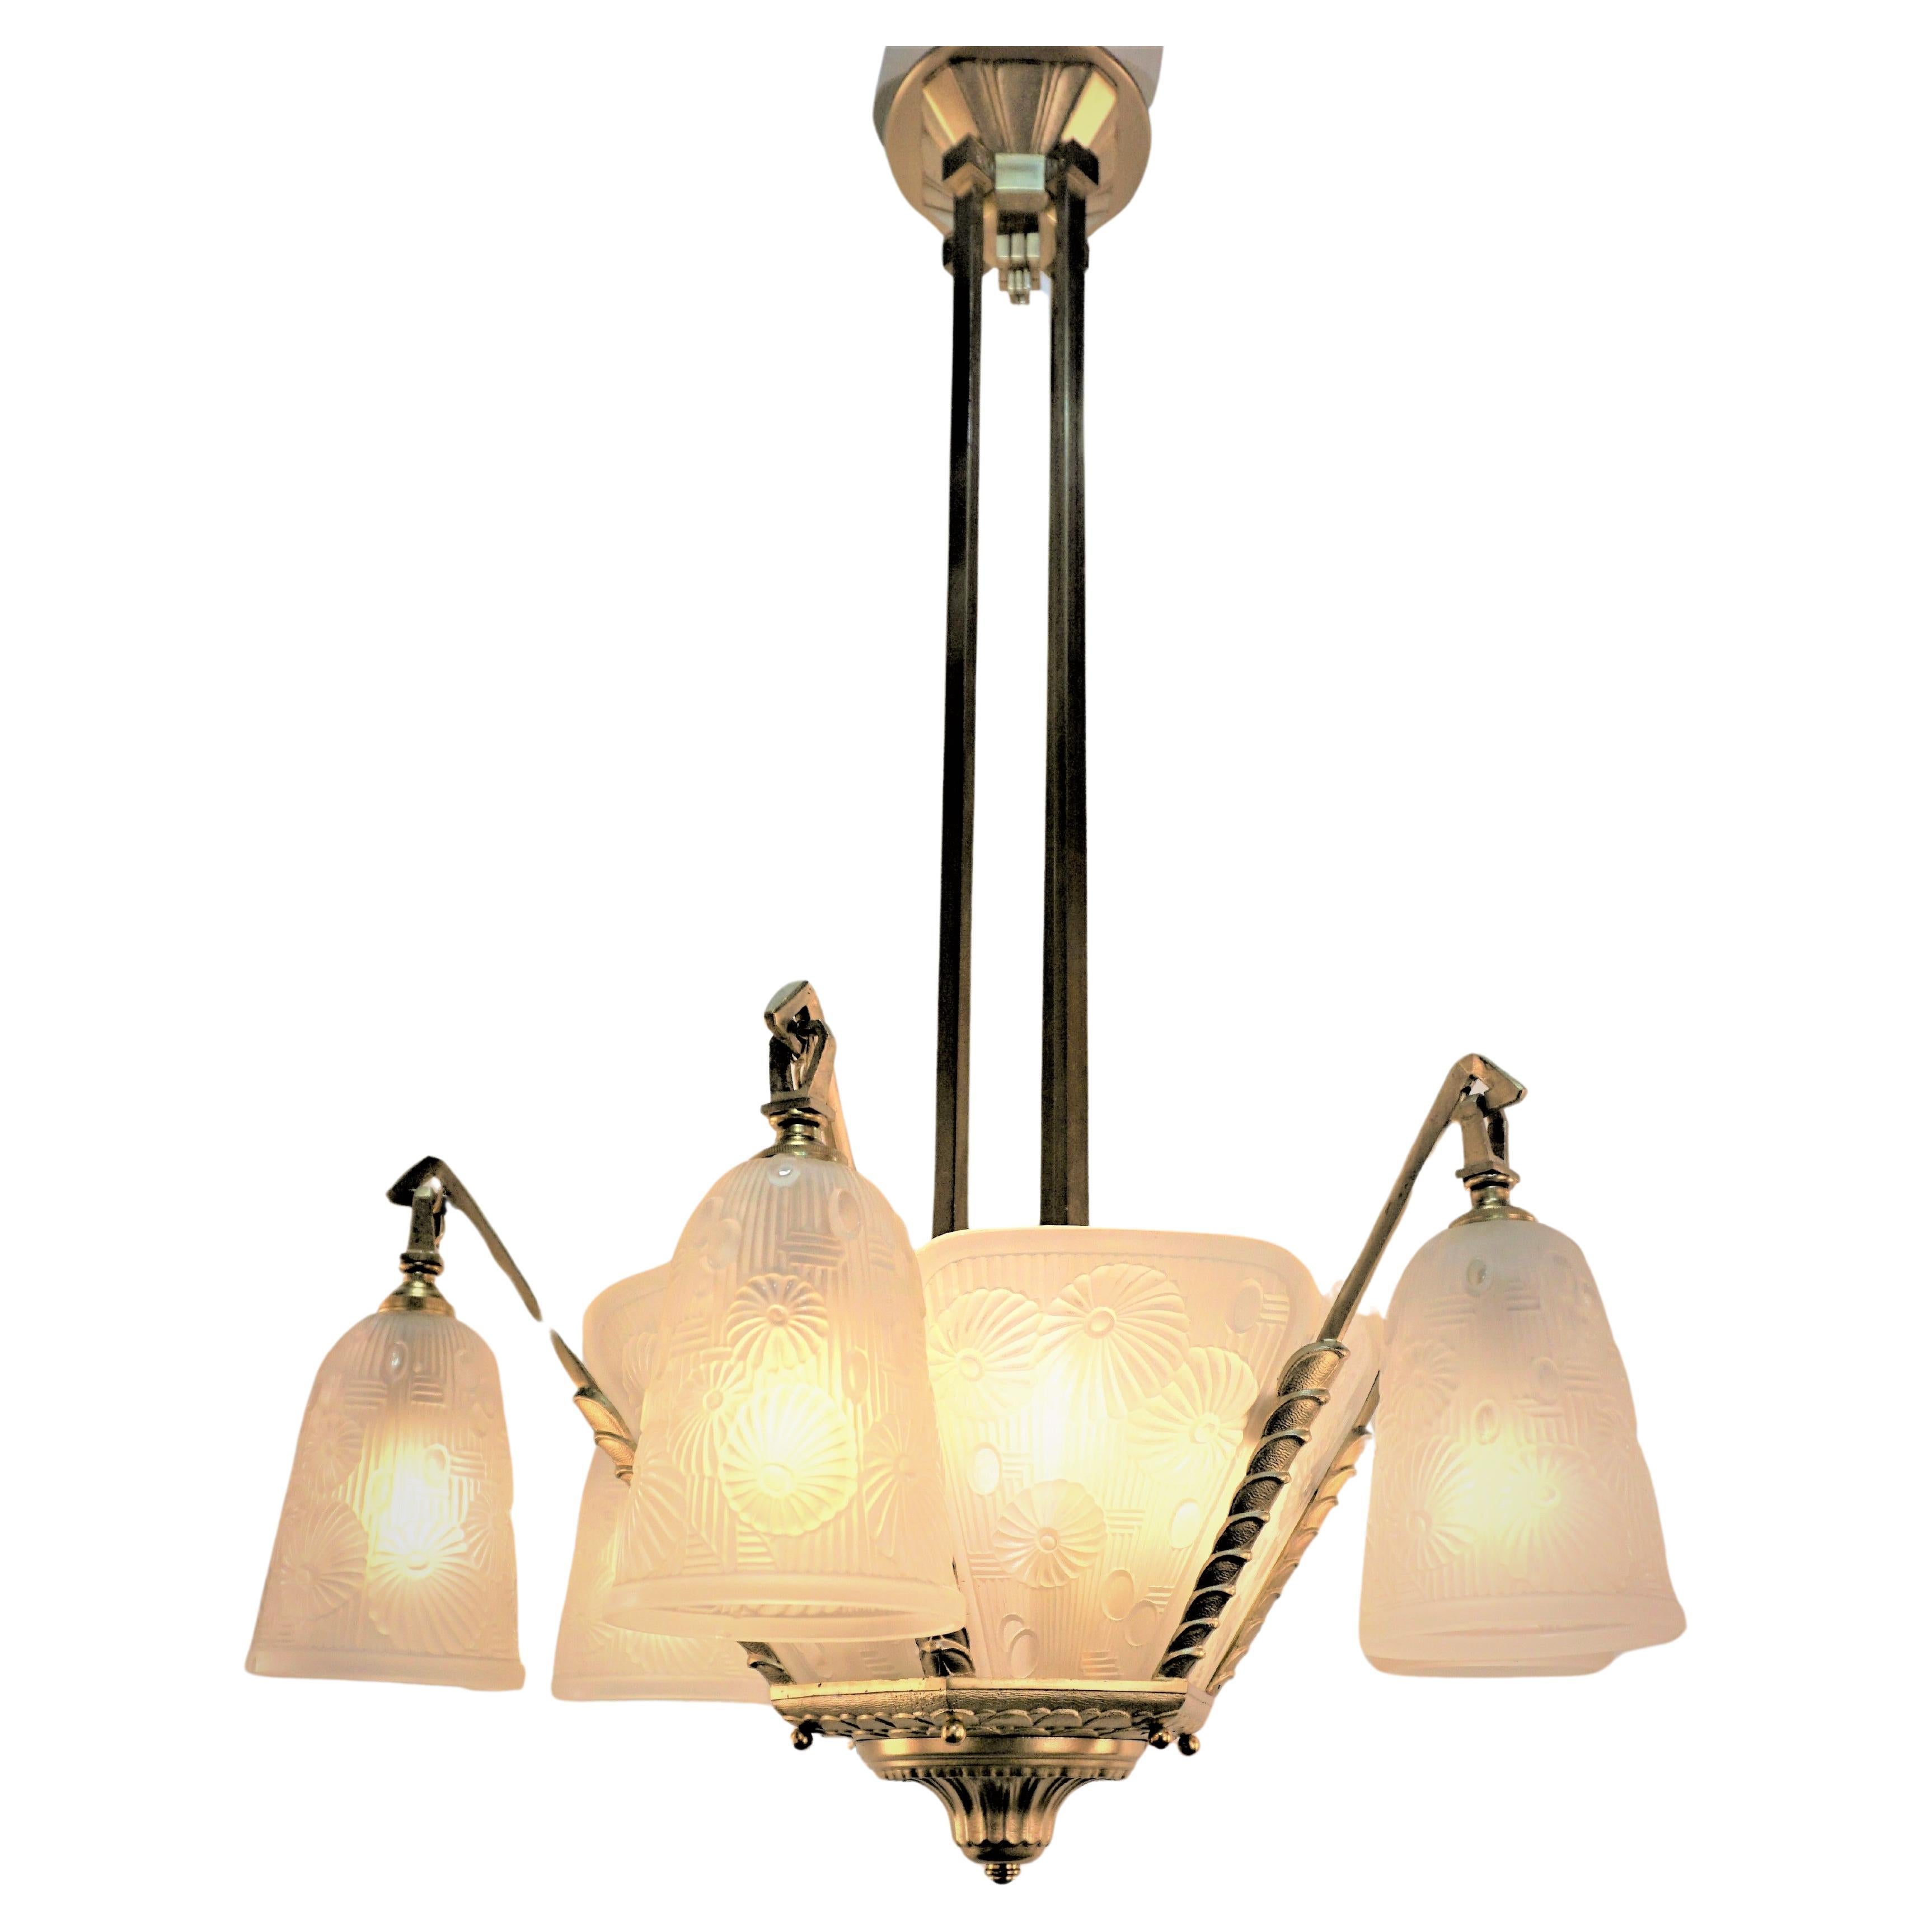 Modern flora design clear frost glass by Daum under name of Lorrain Nancy in late 1920s-early 1930s with fantastic bronze frame Art Deco chandelier.
Total of 12 lights, 60 watt max each.